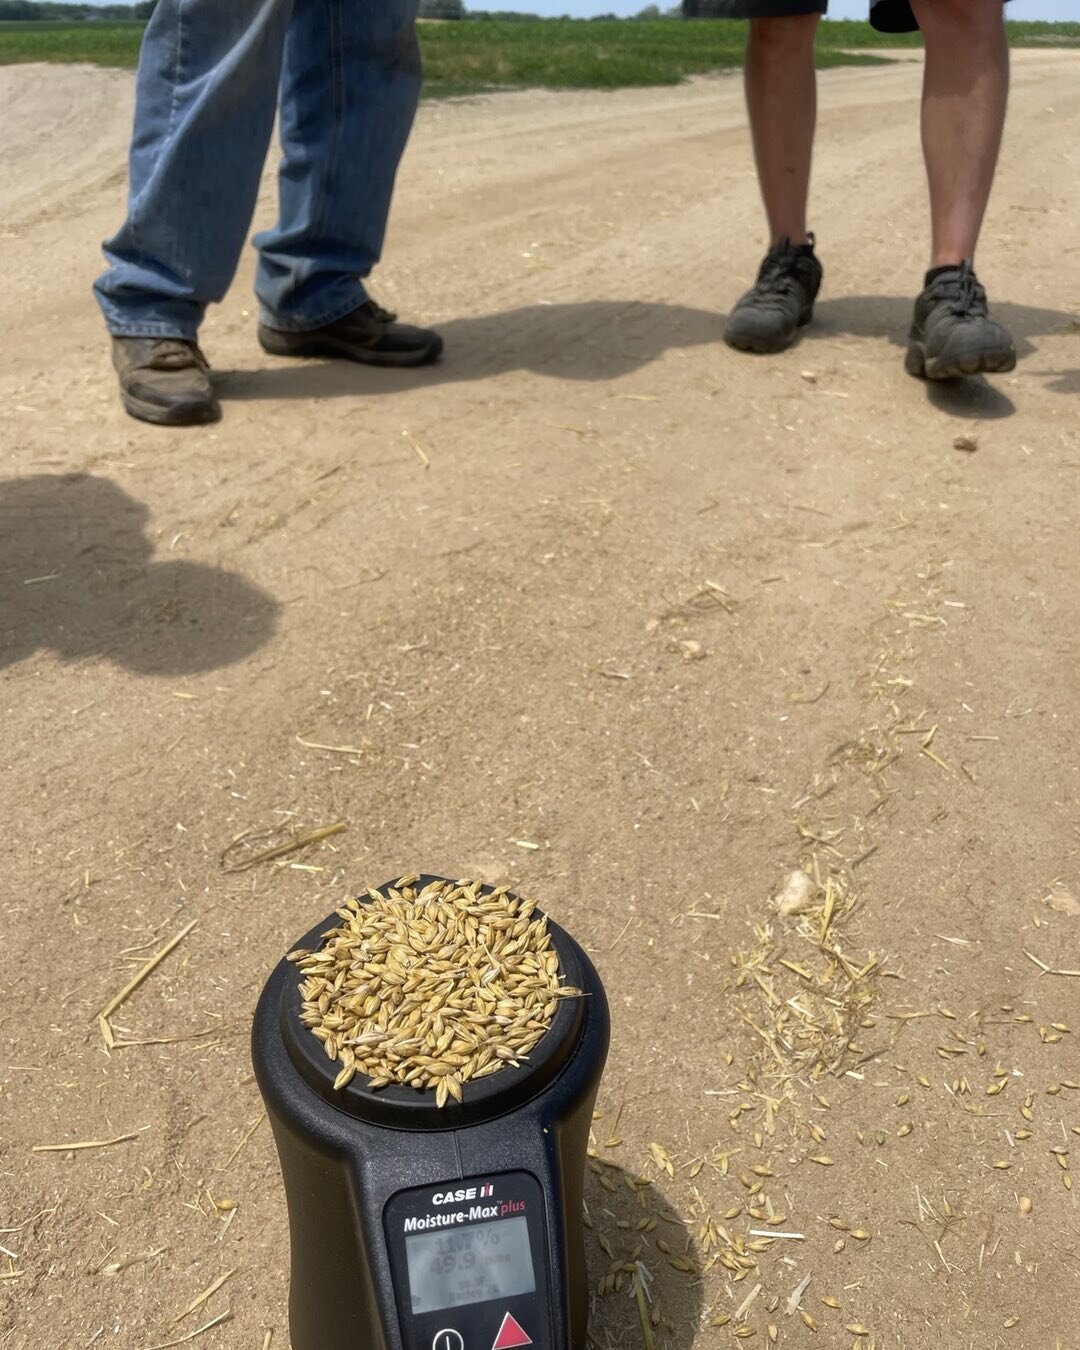 Moment of truth&hellip; moisture testing the sample cut in the main barley field.  The grain needs to be in the correct moisture window to preserve it for malting over the coming year.  #harvest #barley #knowyourfarmer #knowyourmaltster #jerseyfresh 